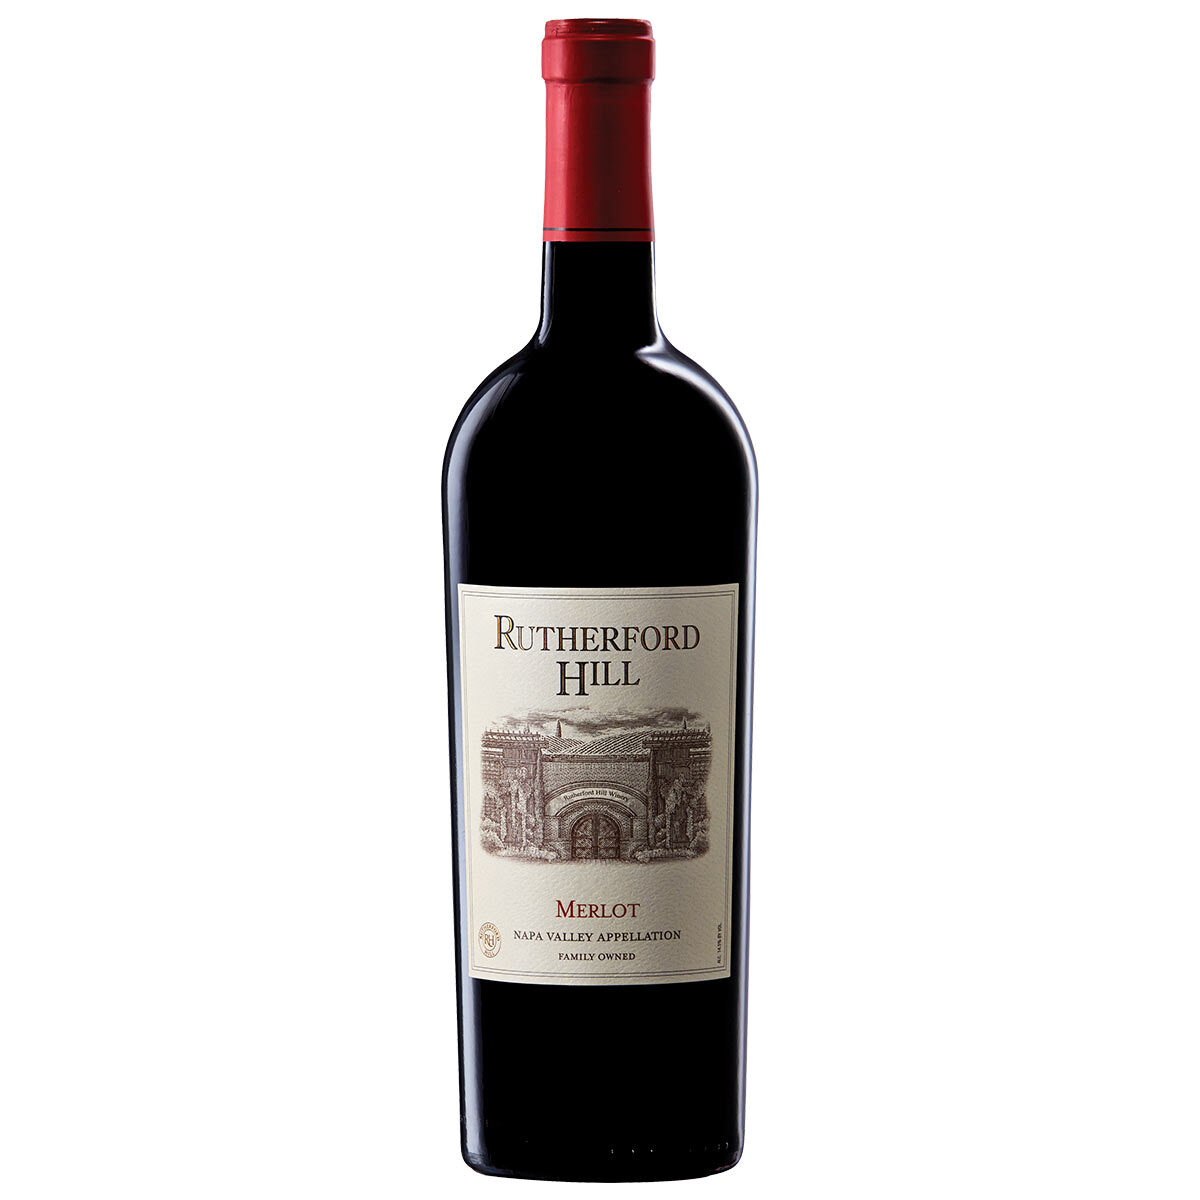 Rutherford Hill Napa Valley Merlot 2019, 75cl